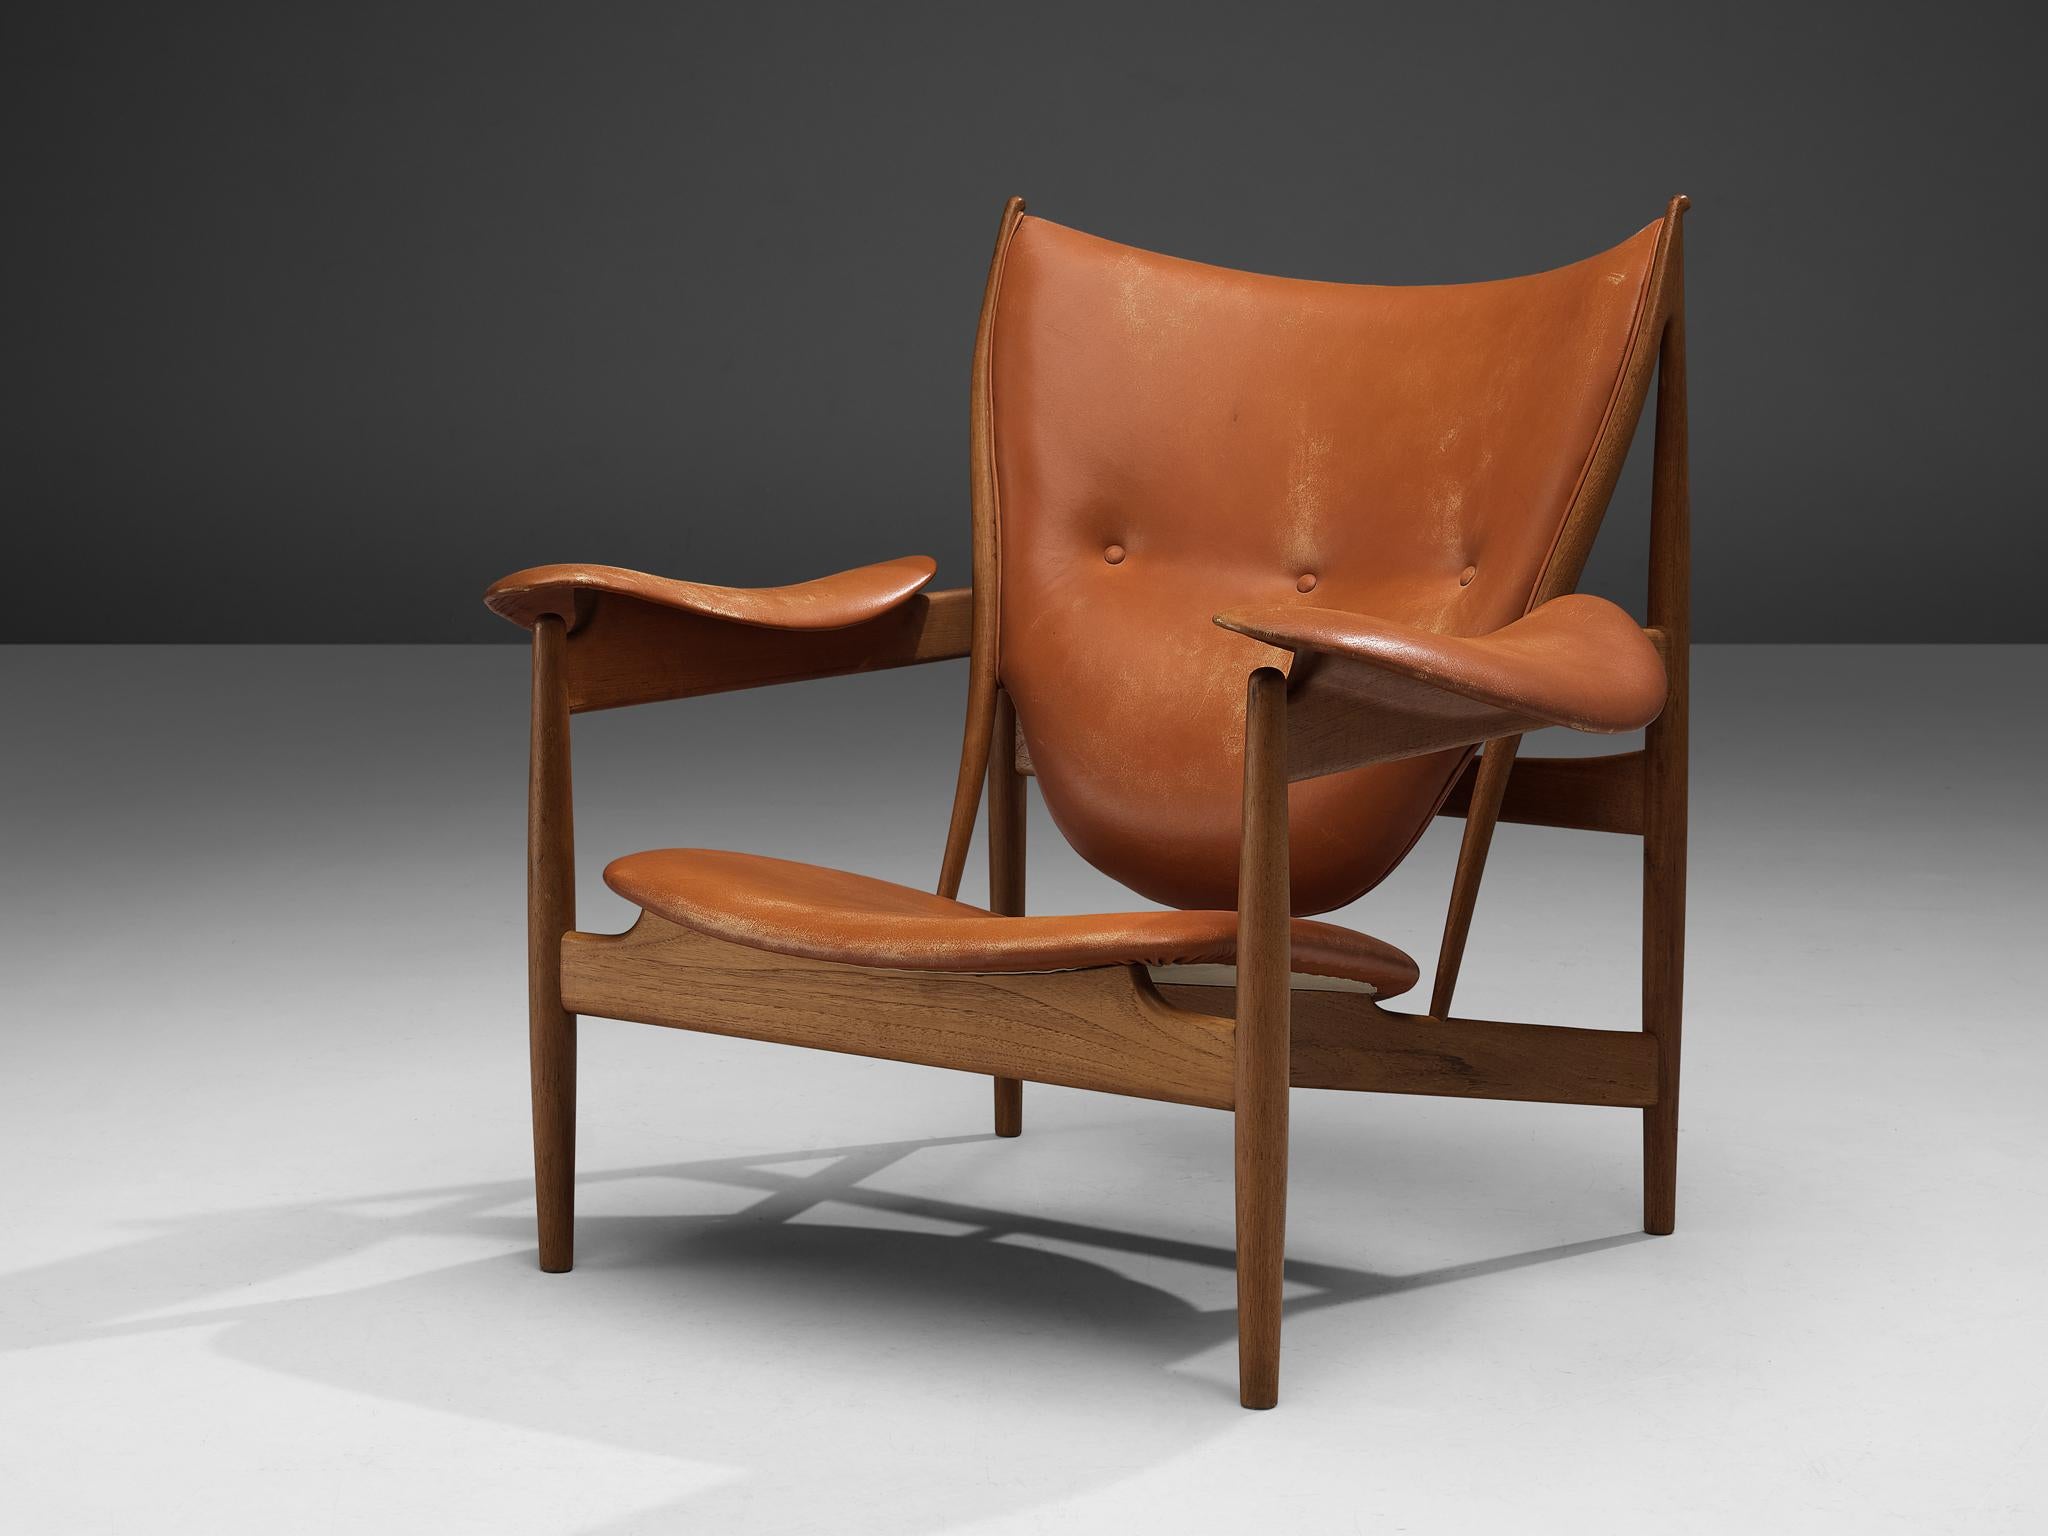 Finn Juhl, ‘Chieftain’ lounge chair, teak, leather, Denmark, designed in 1949

'Chieftain' lounge chair designed by Finn Juhl, owned by Niels Vodder himself which makes this chair very special. The leather on this chair is original and in